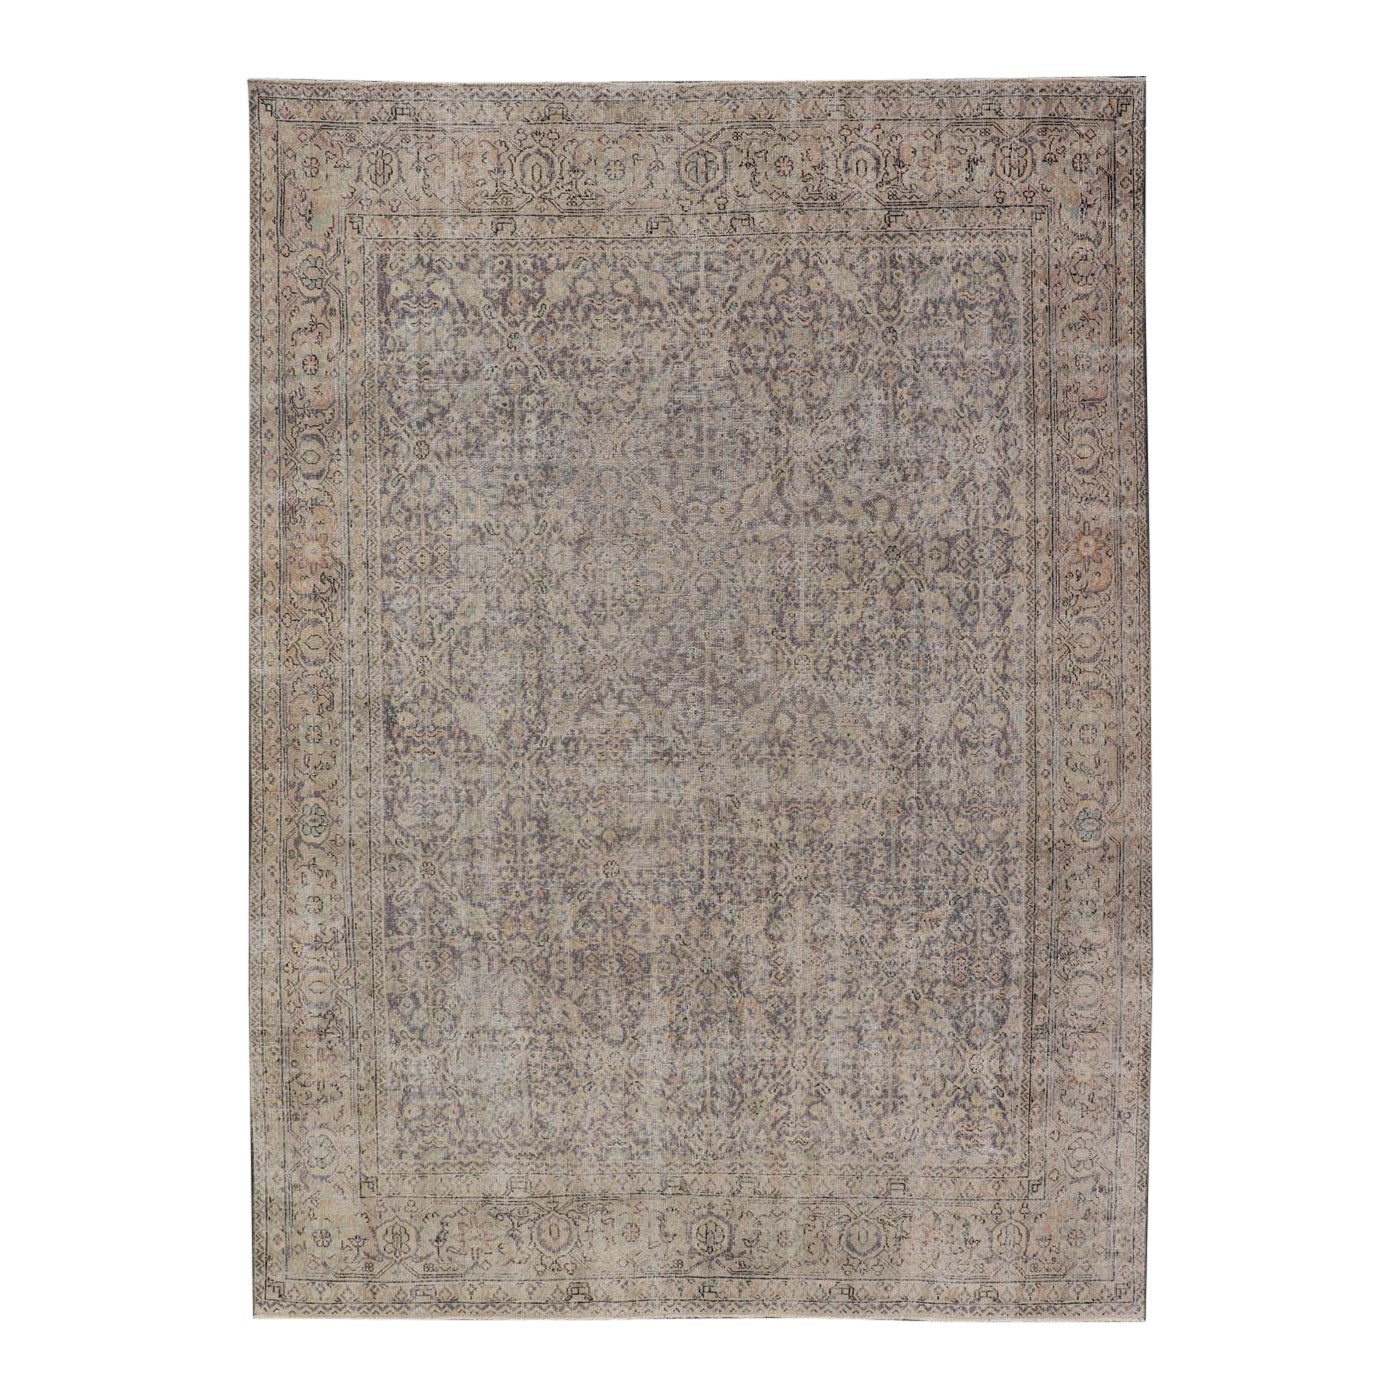 All-Over Vintage Turkish Distressed Rug in Cream, Lavender, Taupe, and Green For Sale